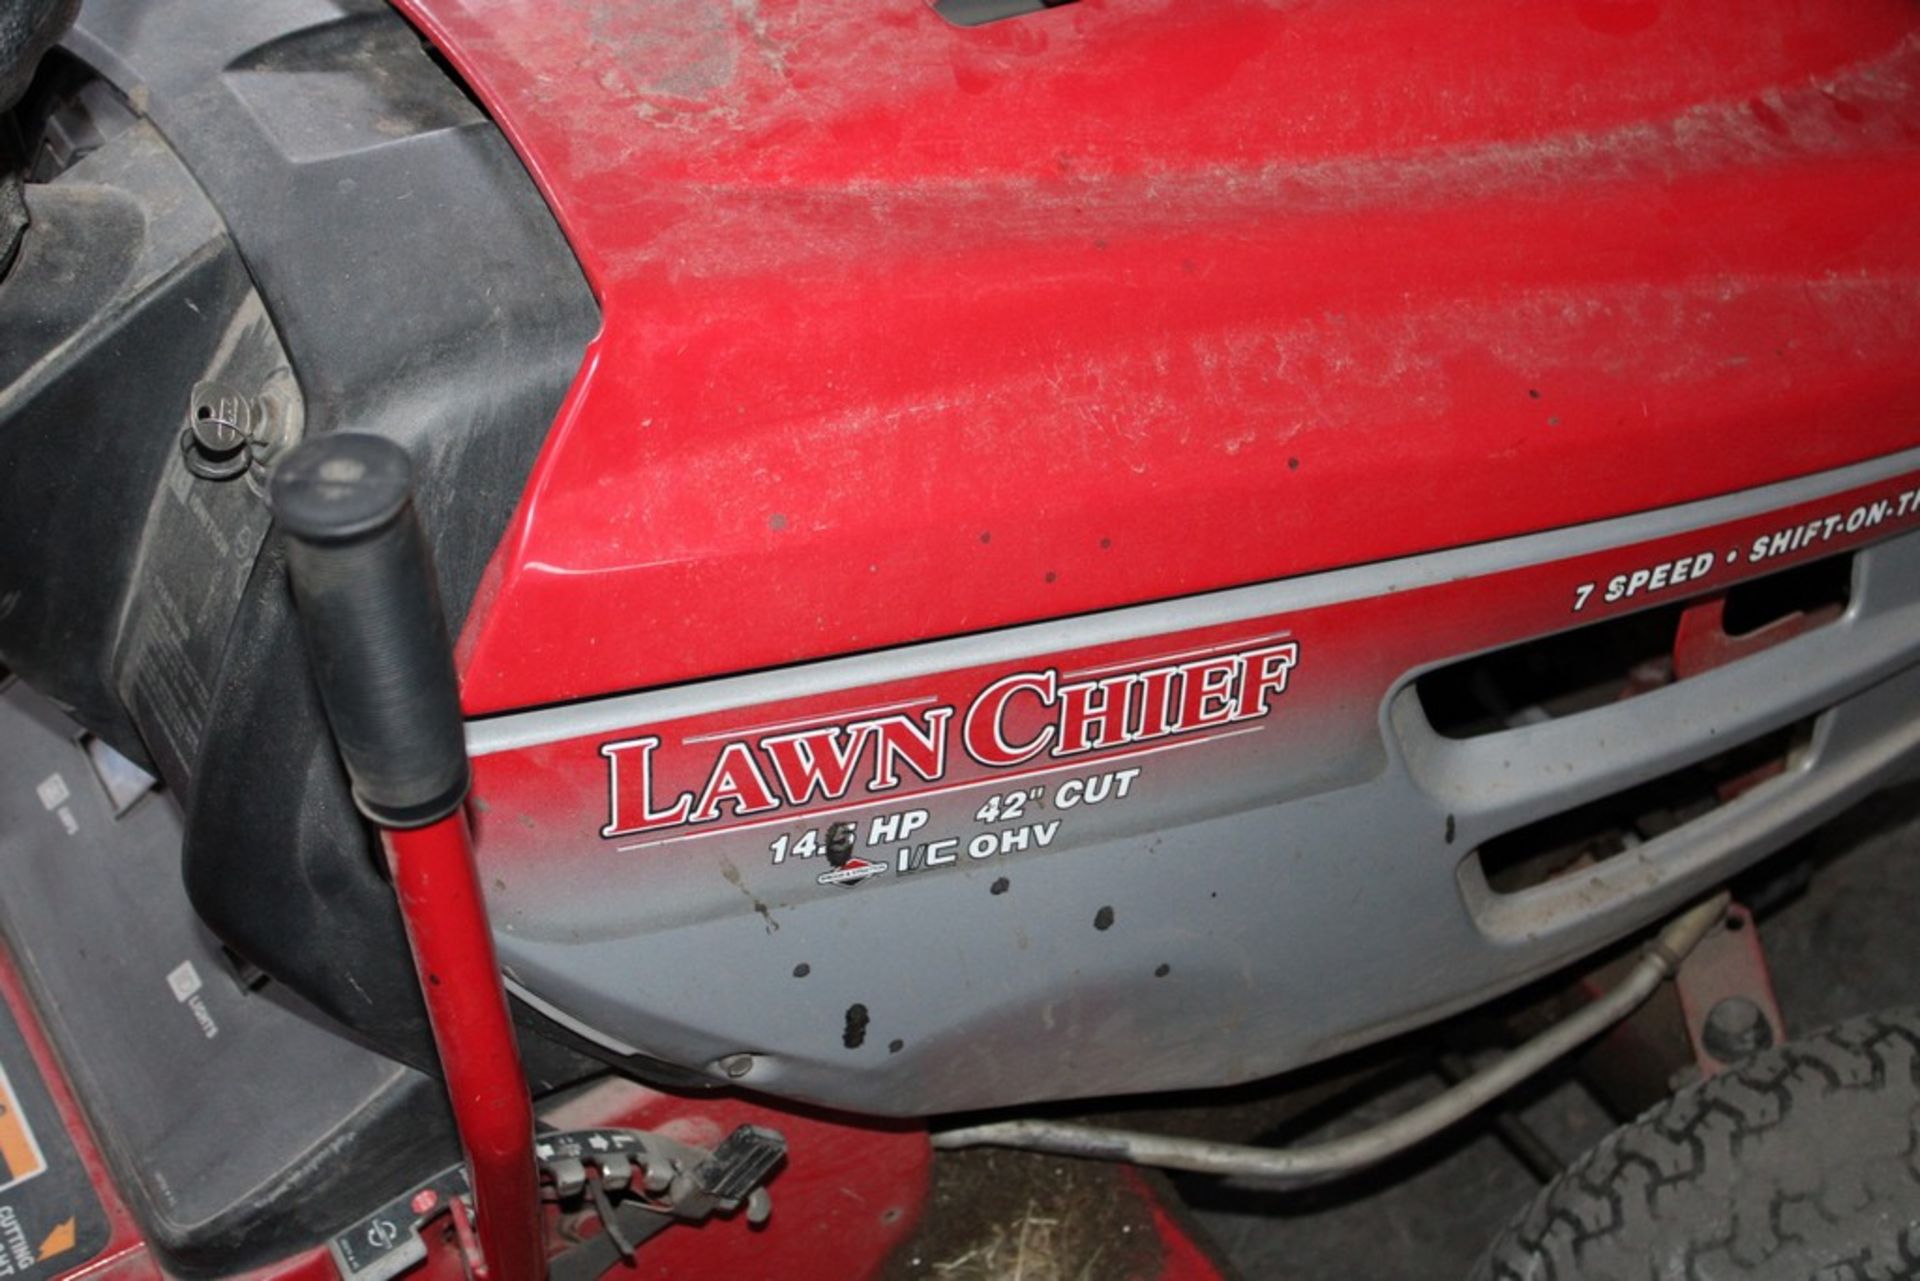 LAWN CHIEF 42" RIDING LAWN MOWER WITH BRIGGS & STRATTON 14.5 HP GAS ENGINE, 7 SPEED, SHIFT ON THE GO - Image 2 of 6